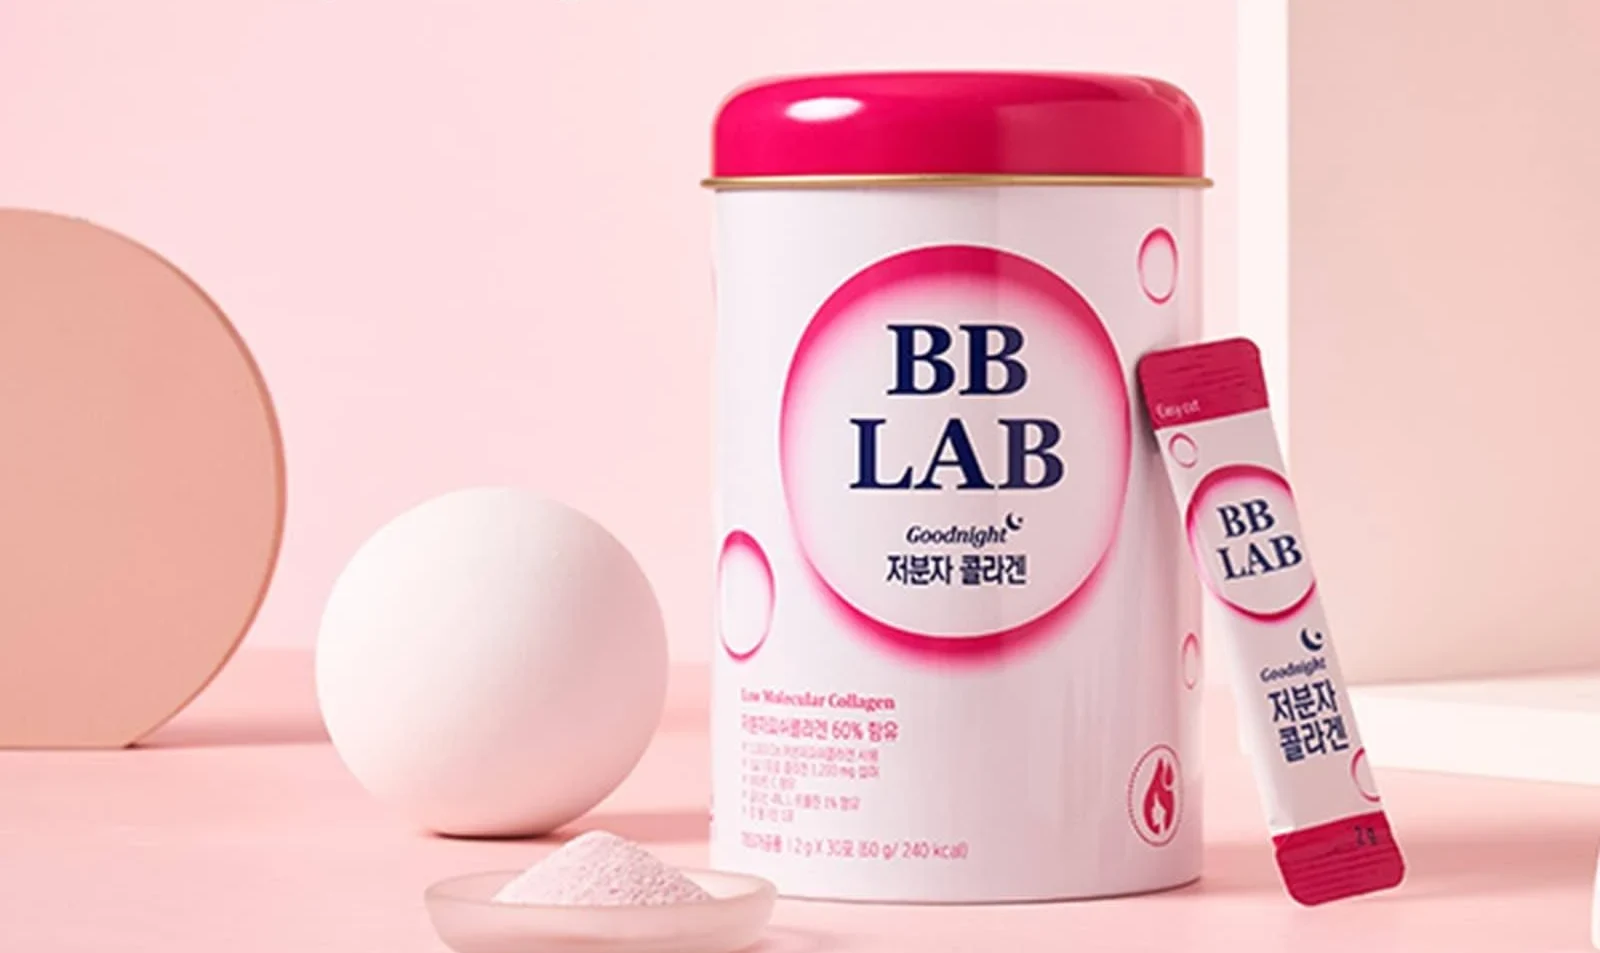 You are currently viewing Bb Lab Collagen Review: Is BB Lab Collagen Worth Trying?